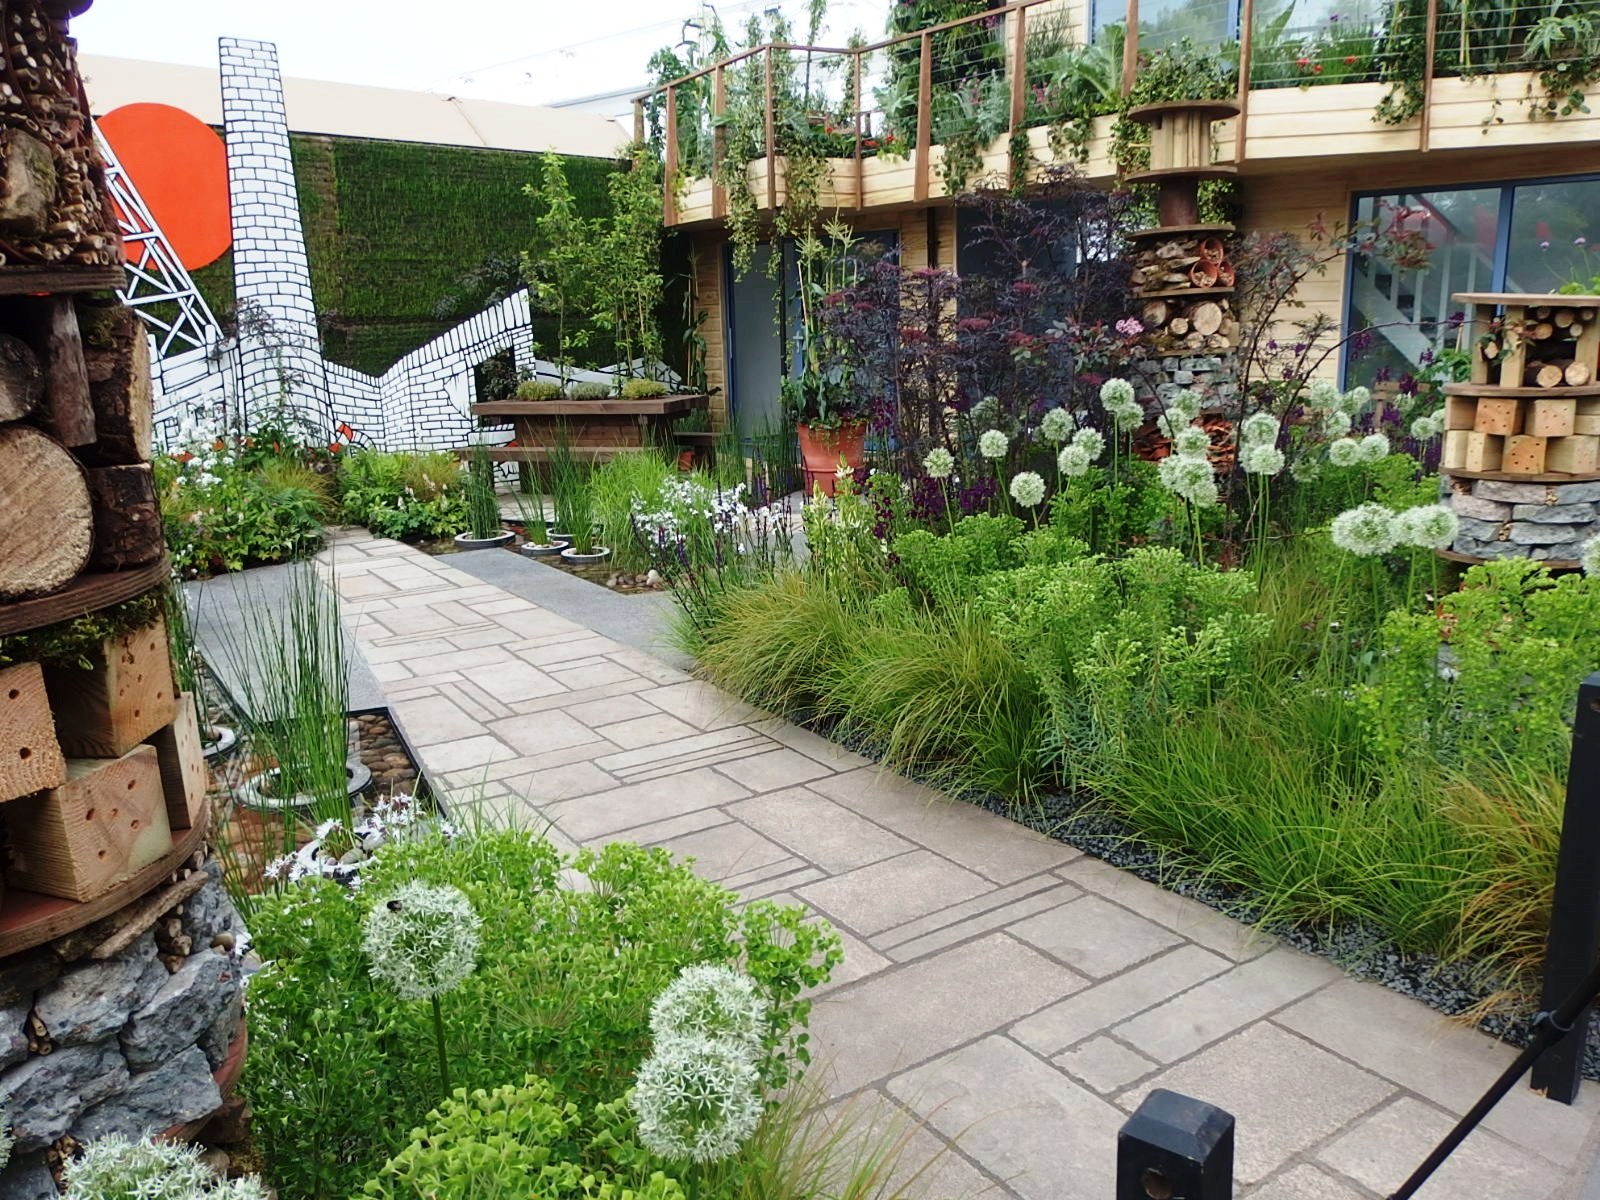 The Great Green Wall Hunt: At Chelsea Flower Show